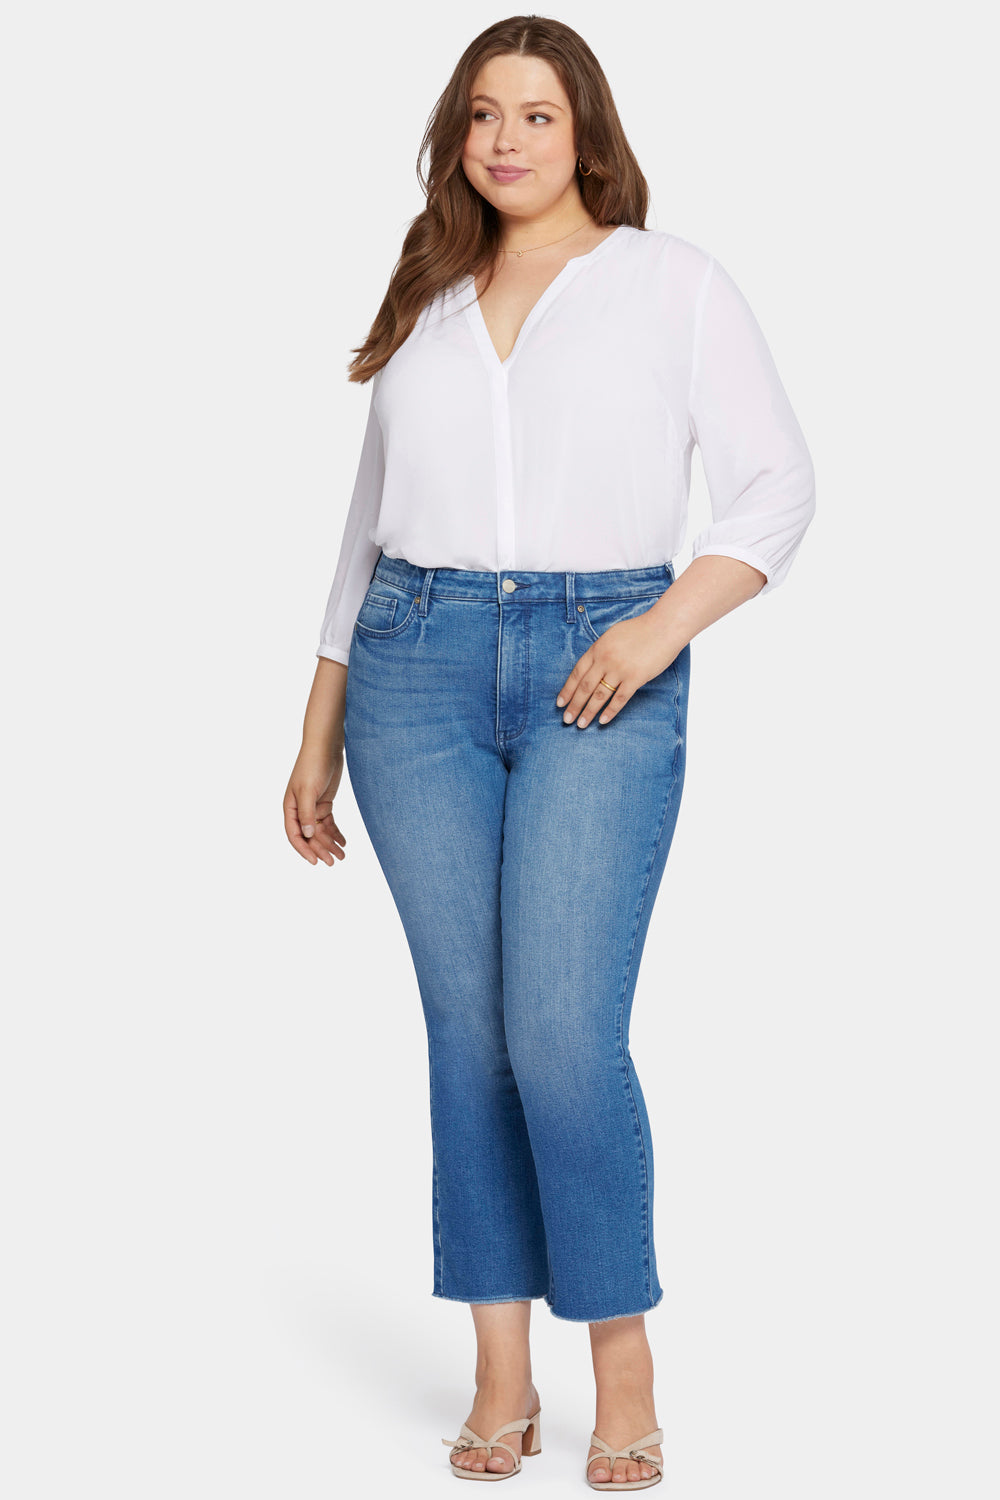 NYDJ Slim Bootcut Ankle Jeans In Plus Size With High Rise And Frayed Hems - Heartland